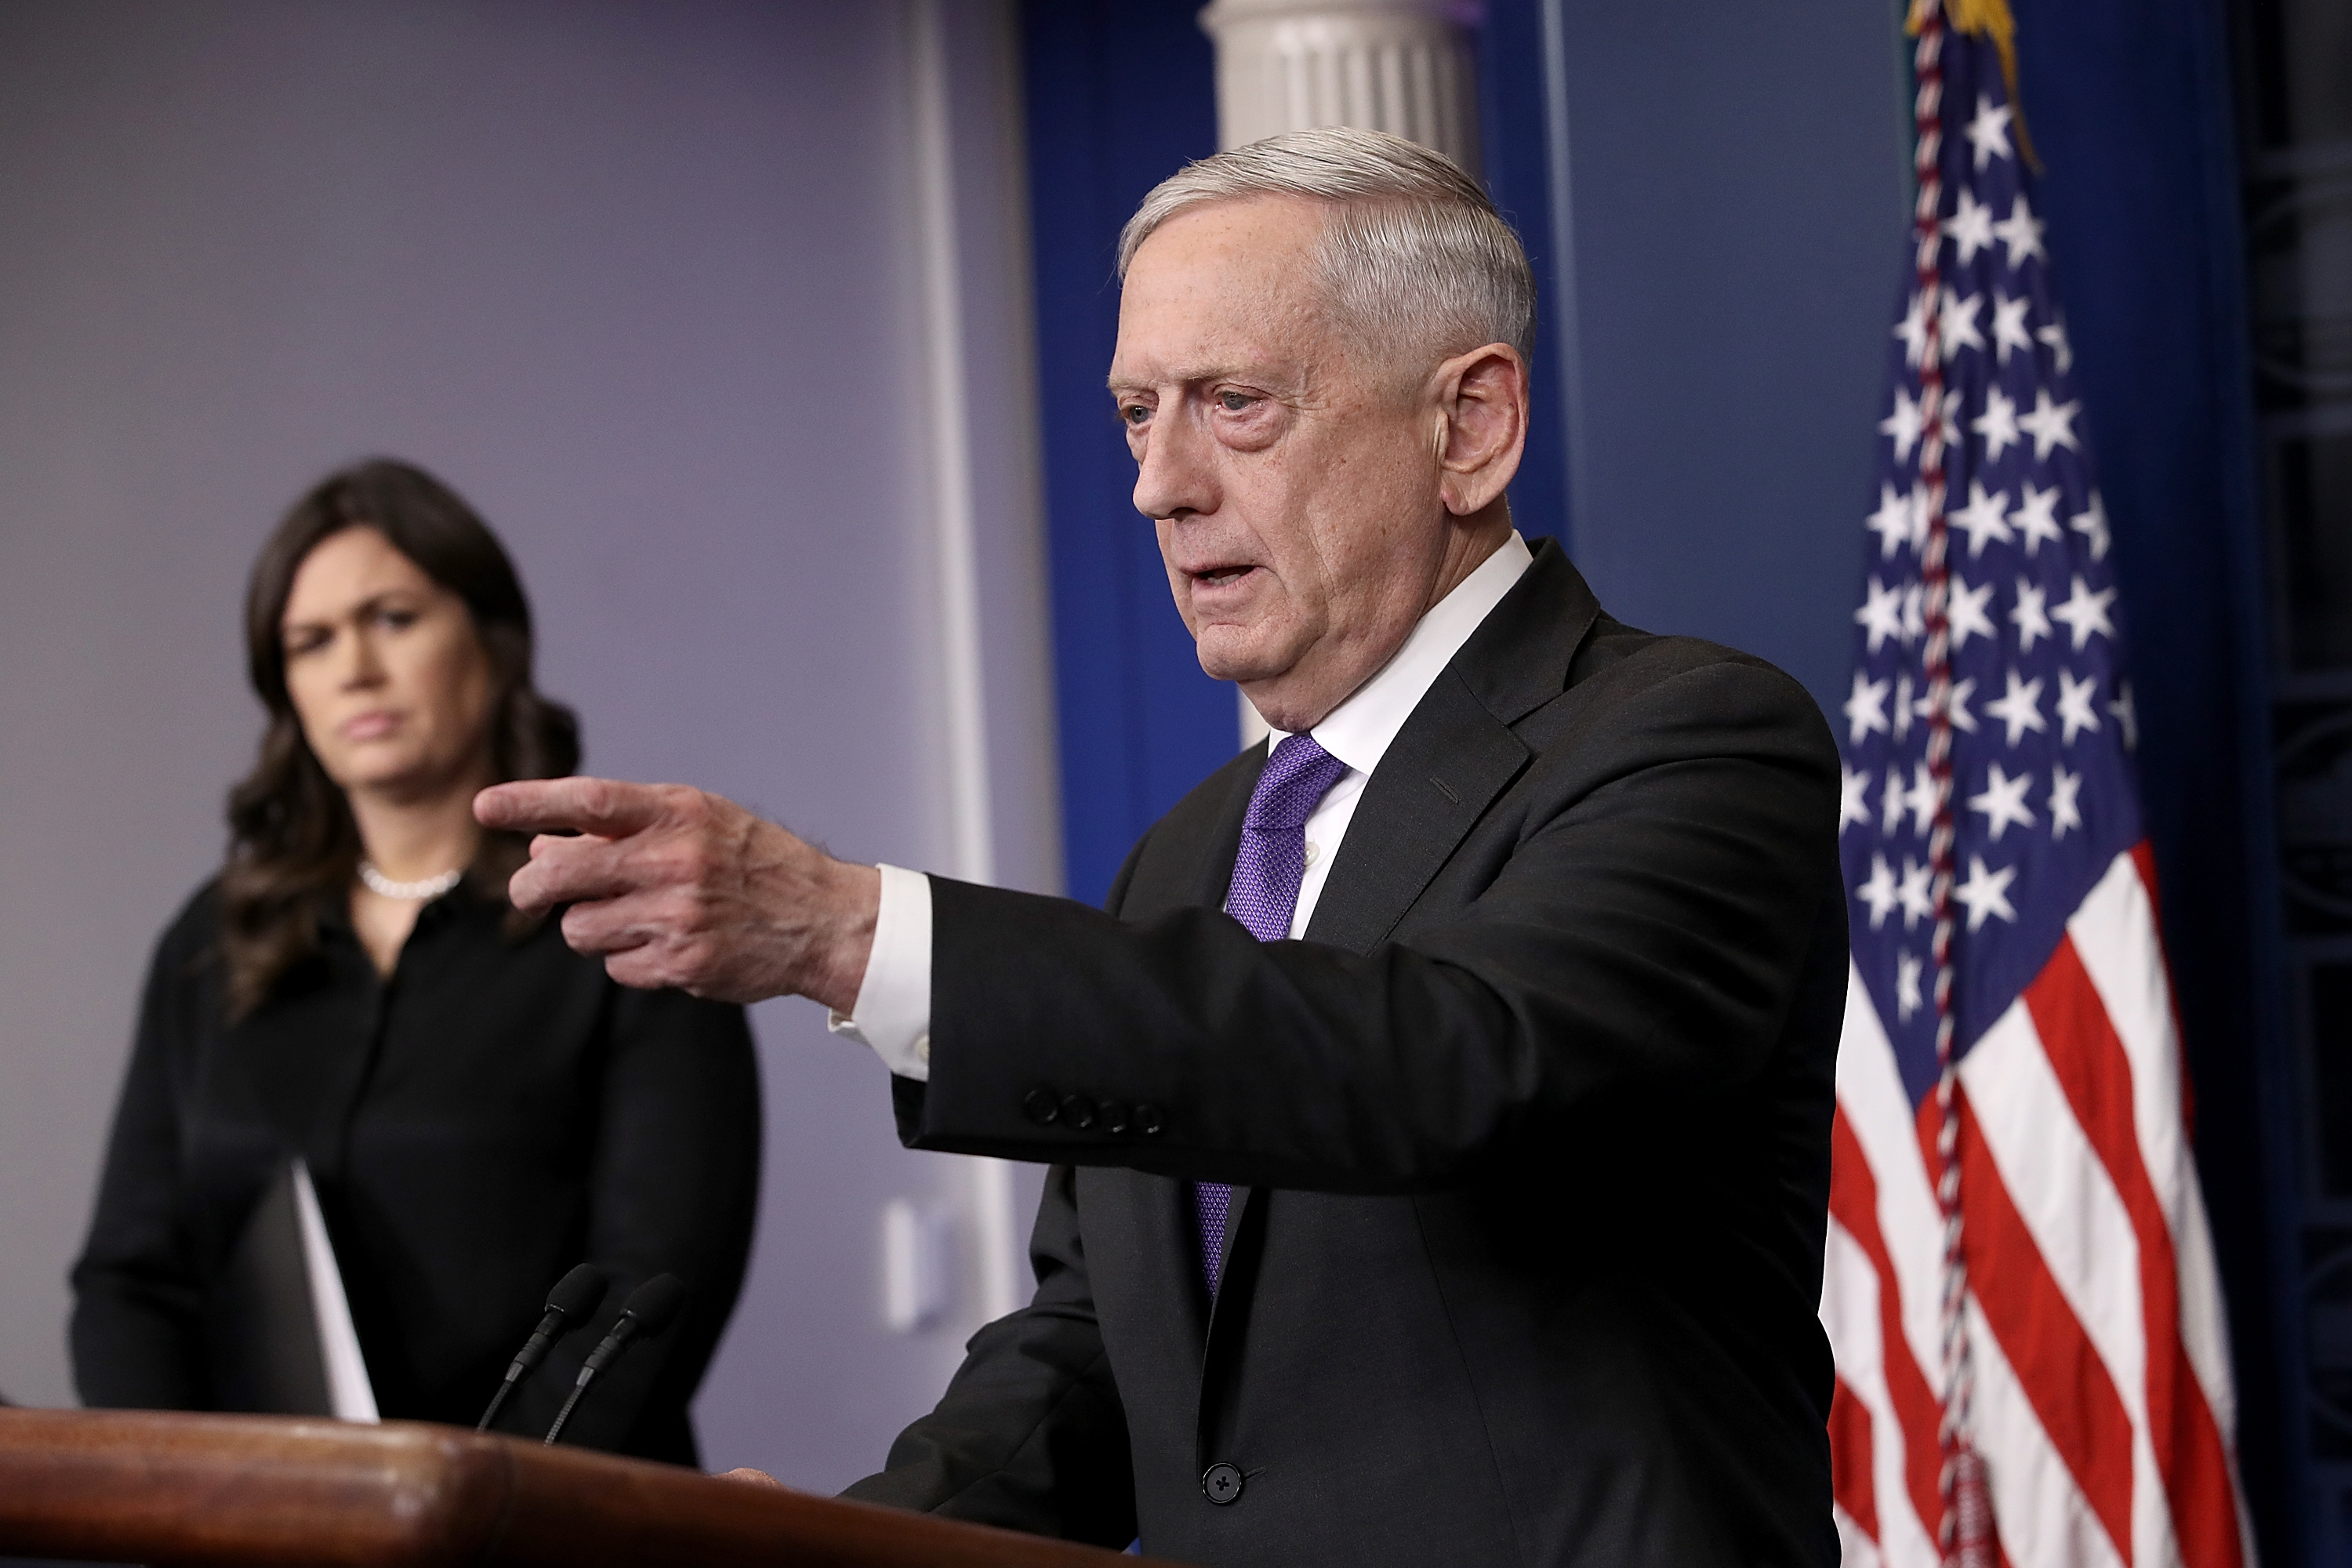 U.S. Secretary of Defense James Mattis at a White House press briefing on Feb. 7, 2018. (Win McNamee—Getty Images)